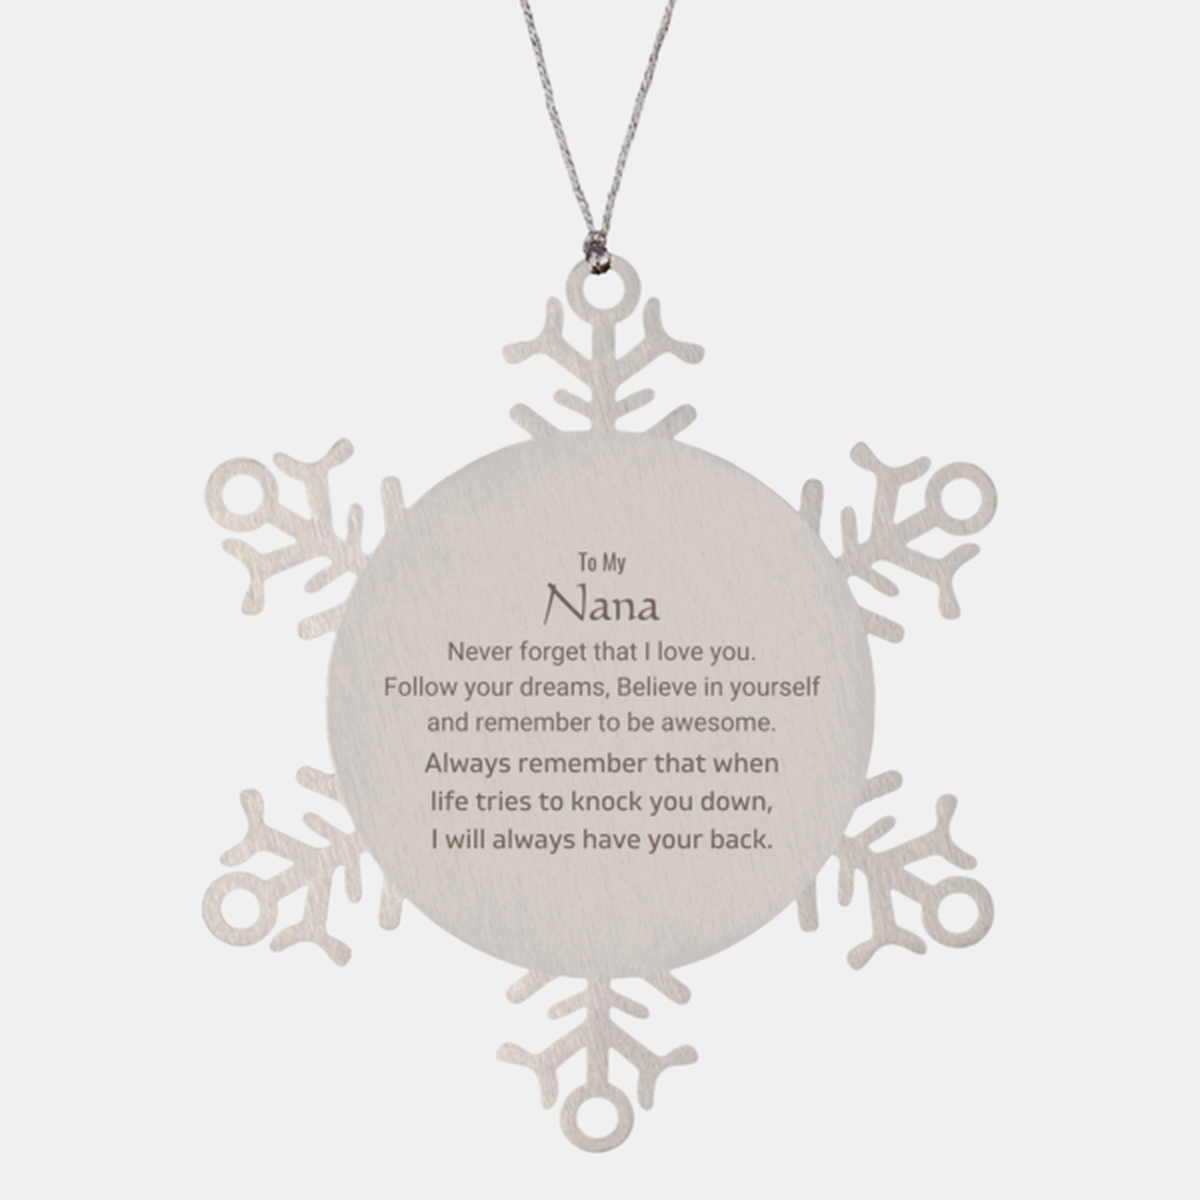 Inspirational Gifts for Nana, Follow your dreams, Believe in yourself, Nana Snowflake Ornament, Birthday Christmas Unique Gifts For Nana